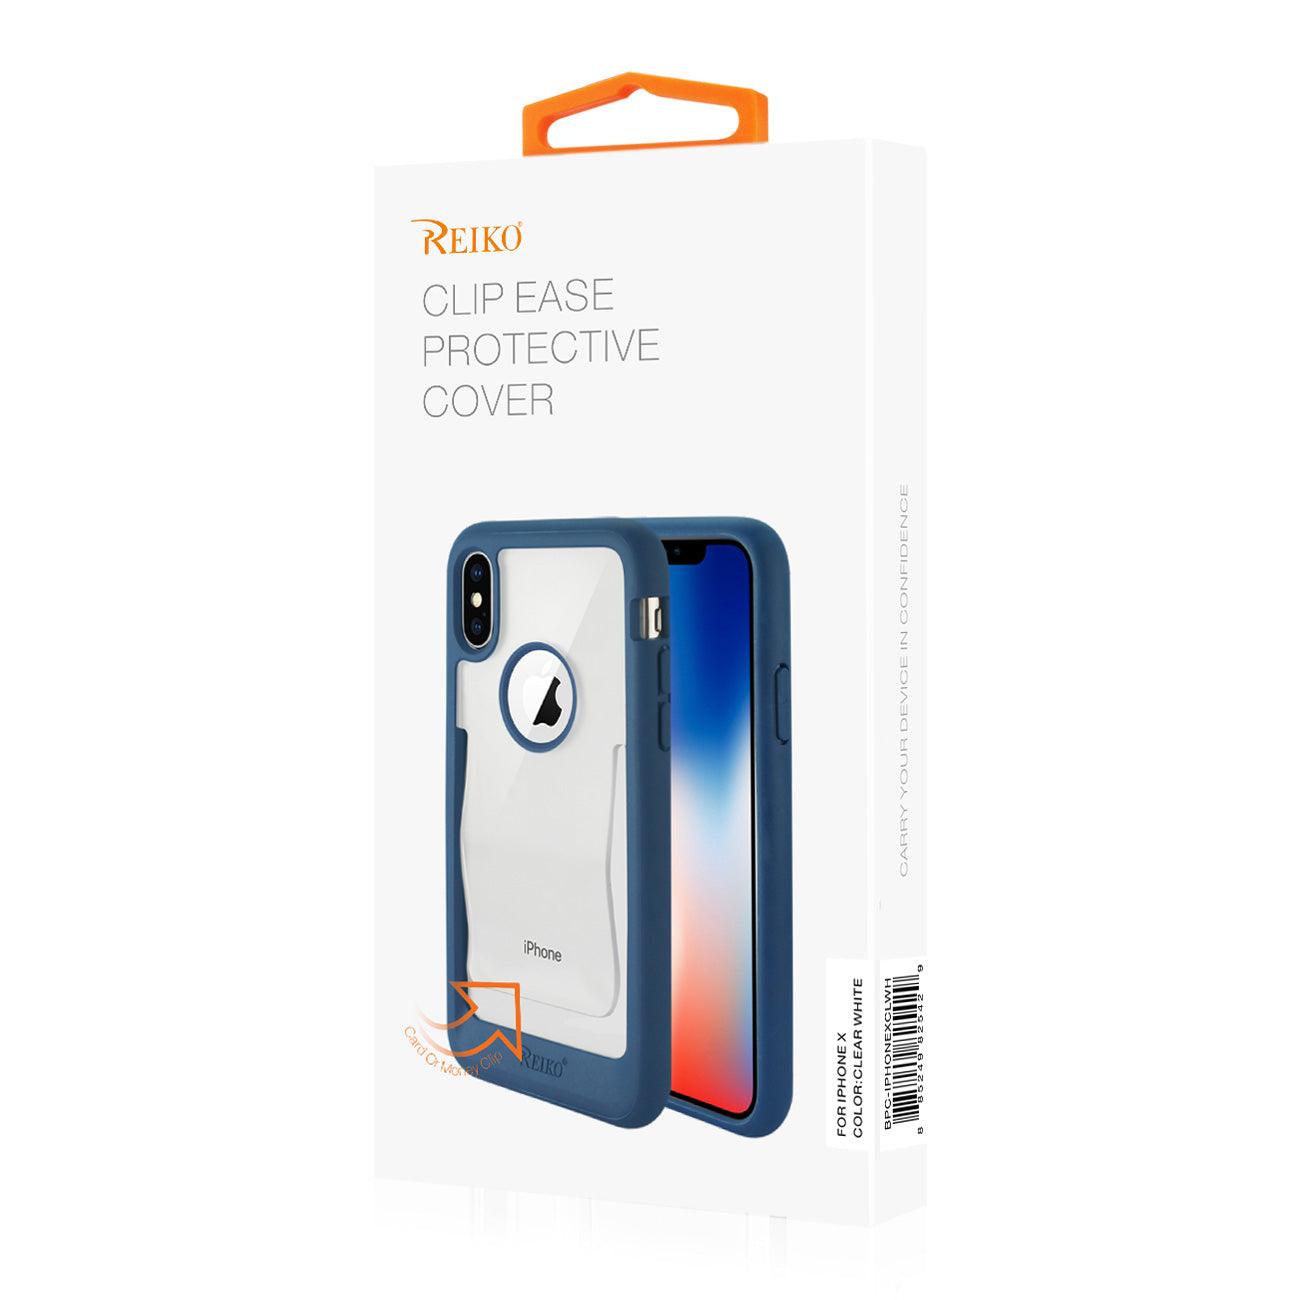 OtterBox Clear Pattern Design Case for iPhone x / iPhone Xs - Clear